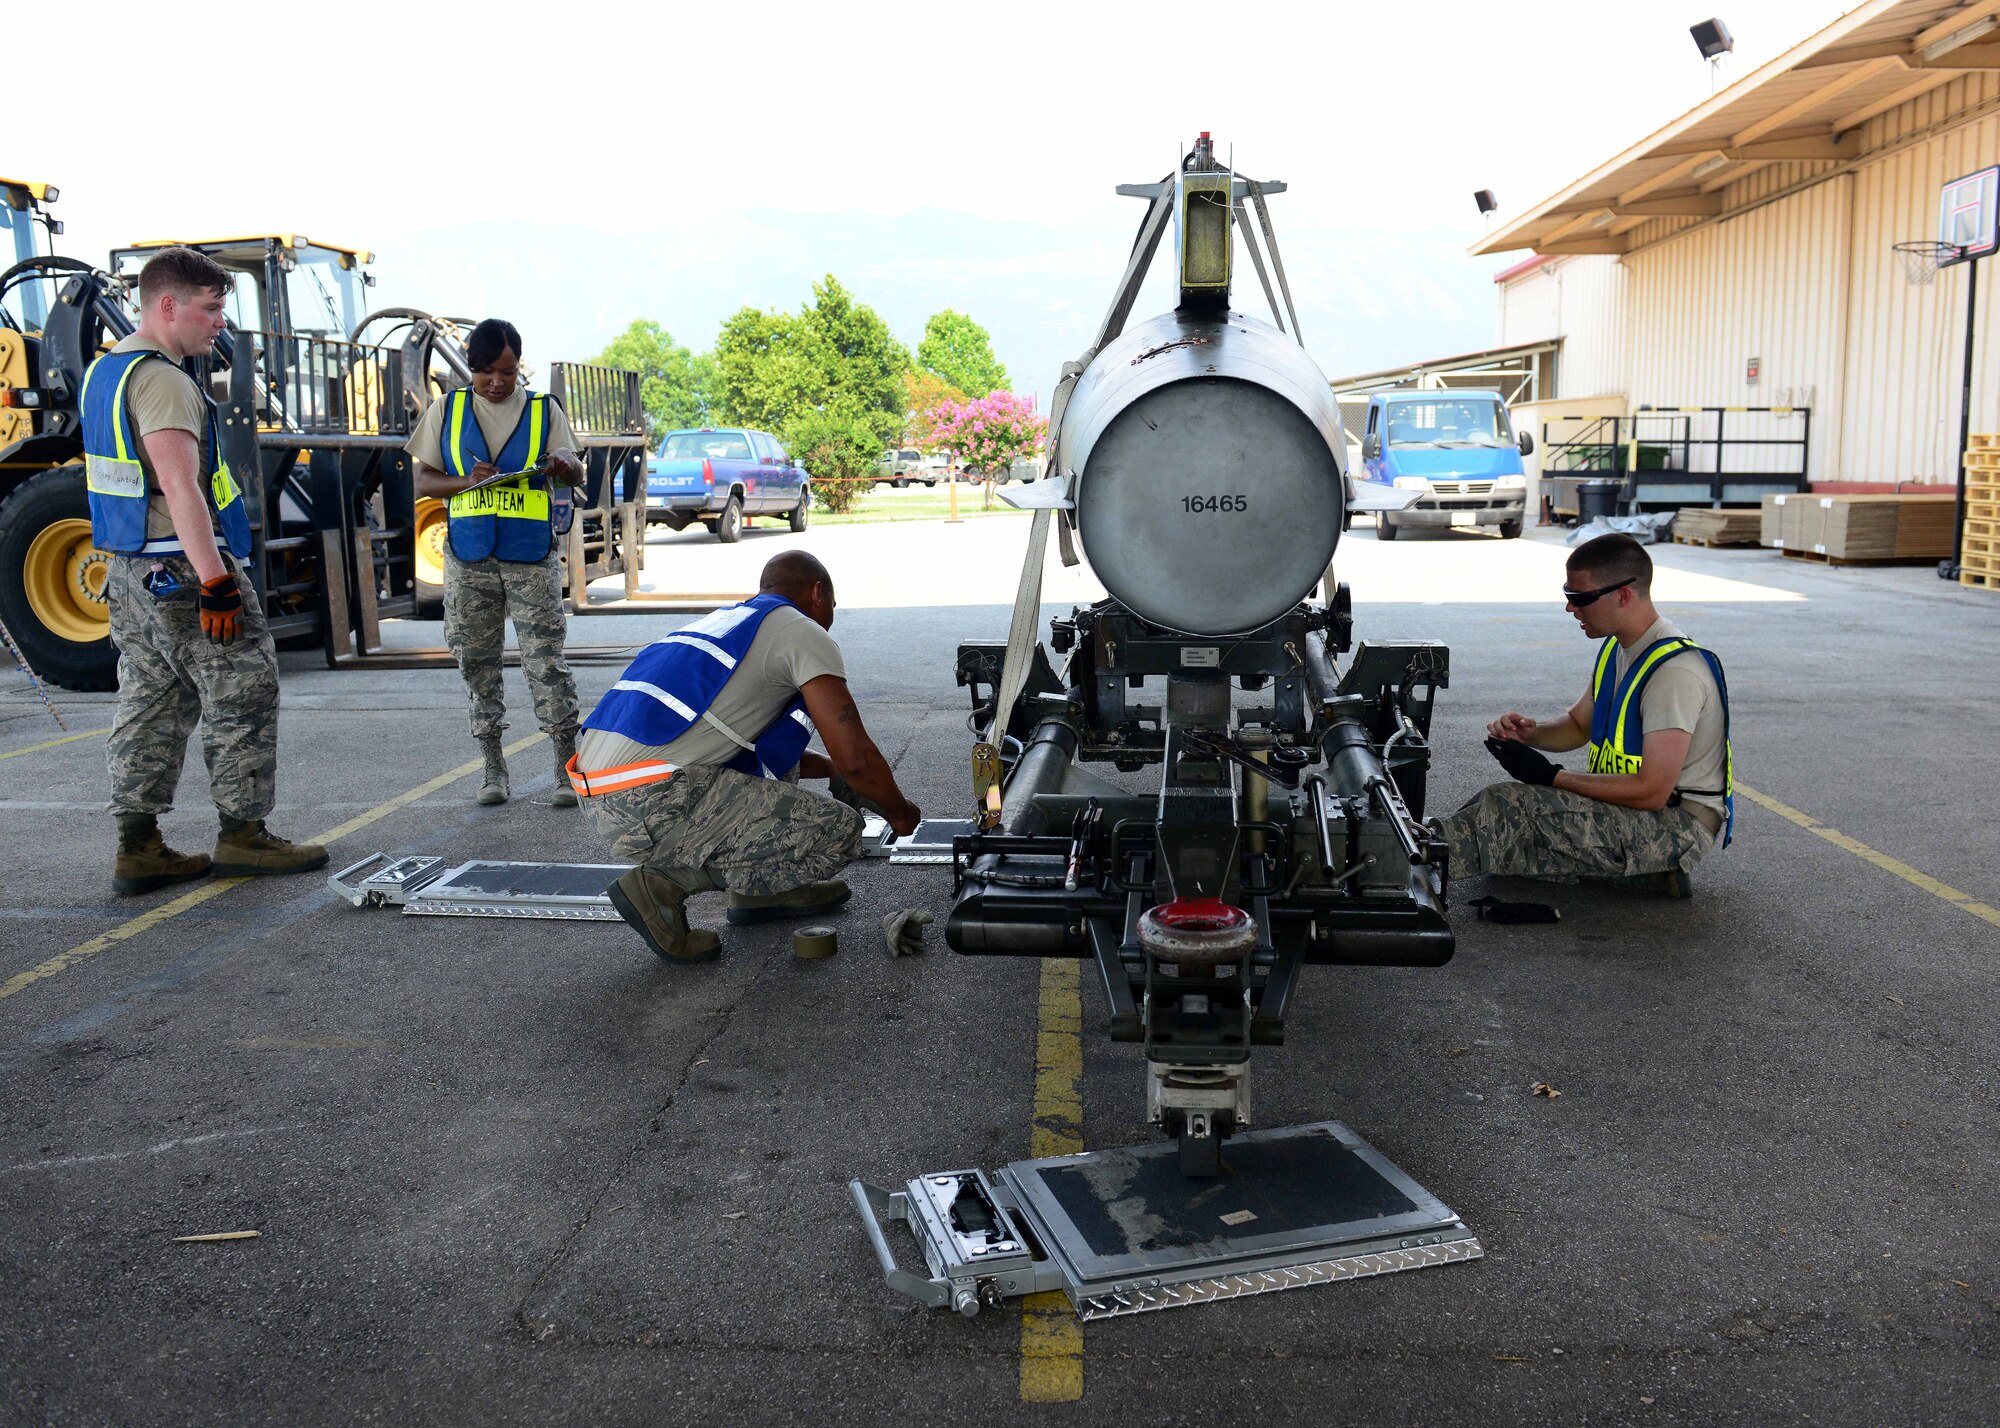 Airmen from the 31st Logistics Readiness Squadron cargo deployment function measure and weigh an excess fuel tank prior to a deployment Aug. 8, 2015, at Aviano Air Base, Italy. This deployment coincides with Turkey's decision to host U.S. aircraft to conduct counter-ISIL operations. (U.S. Air Force photo by Airman 1st Class Deana Heitzman)